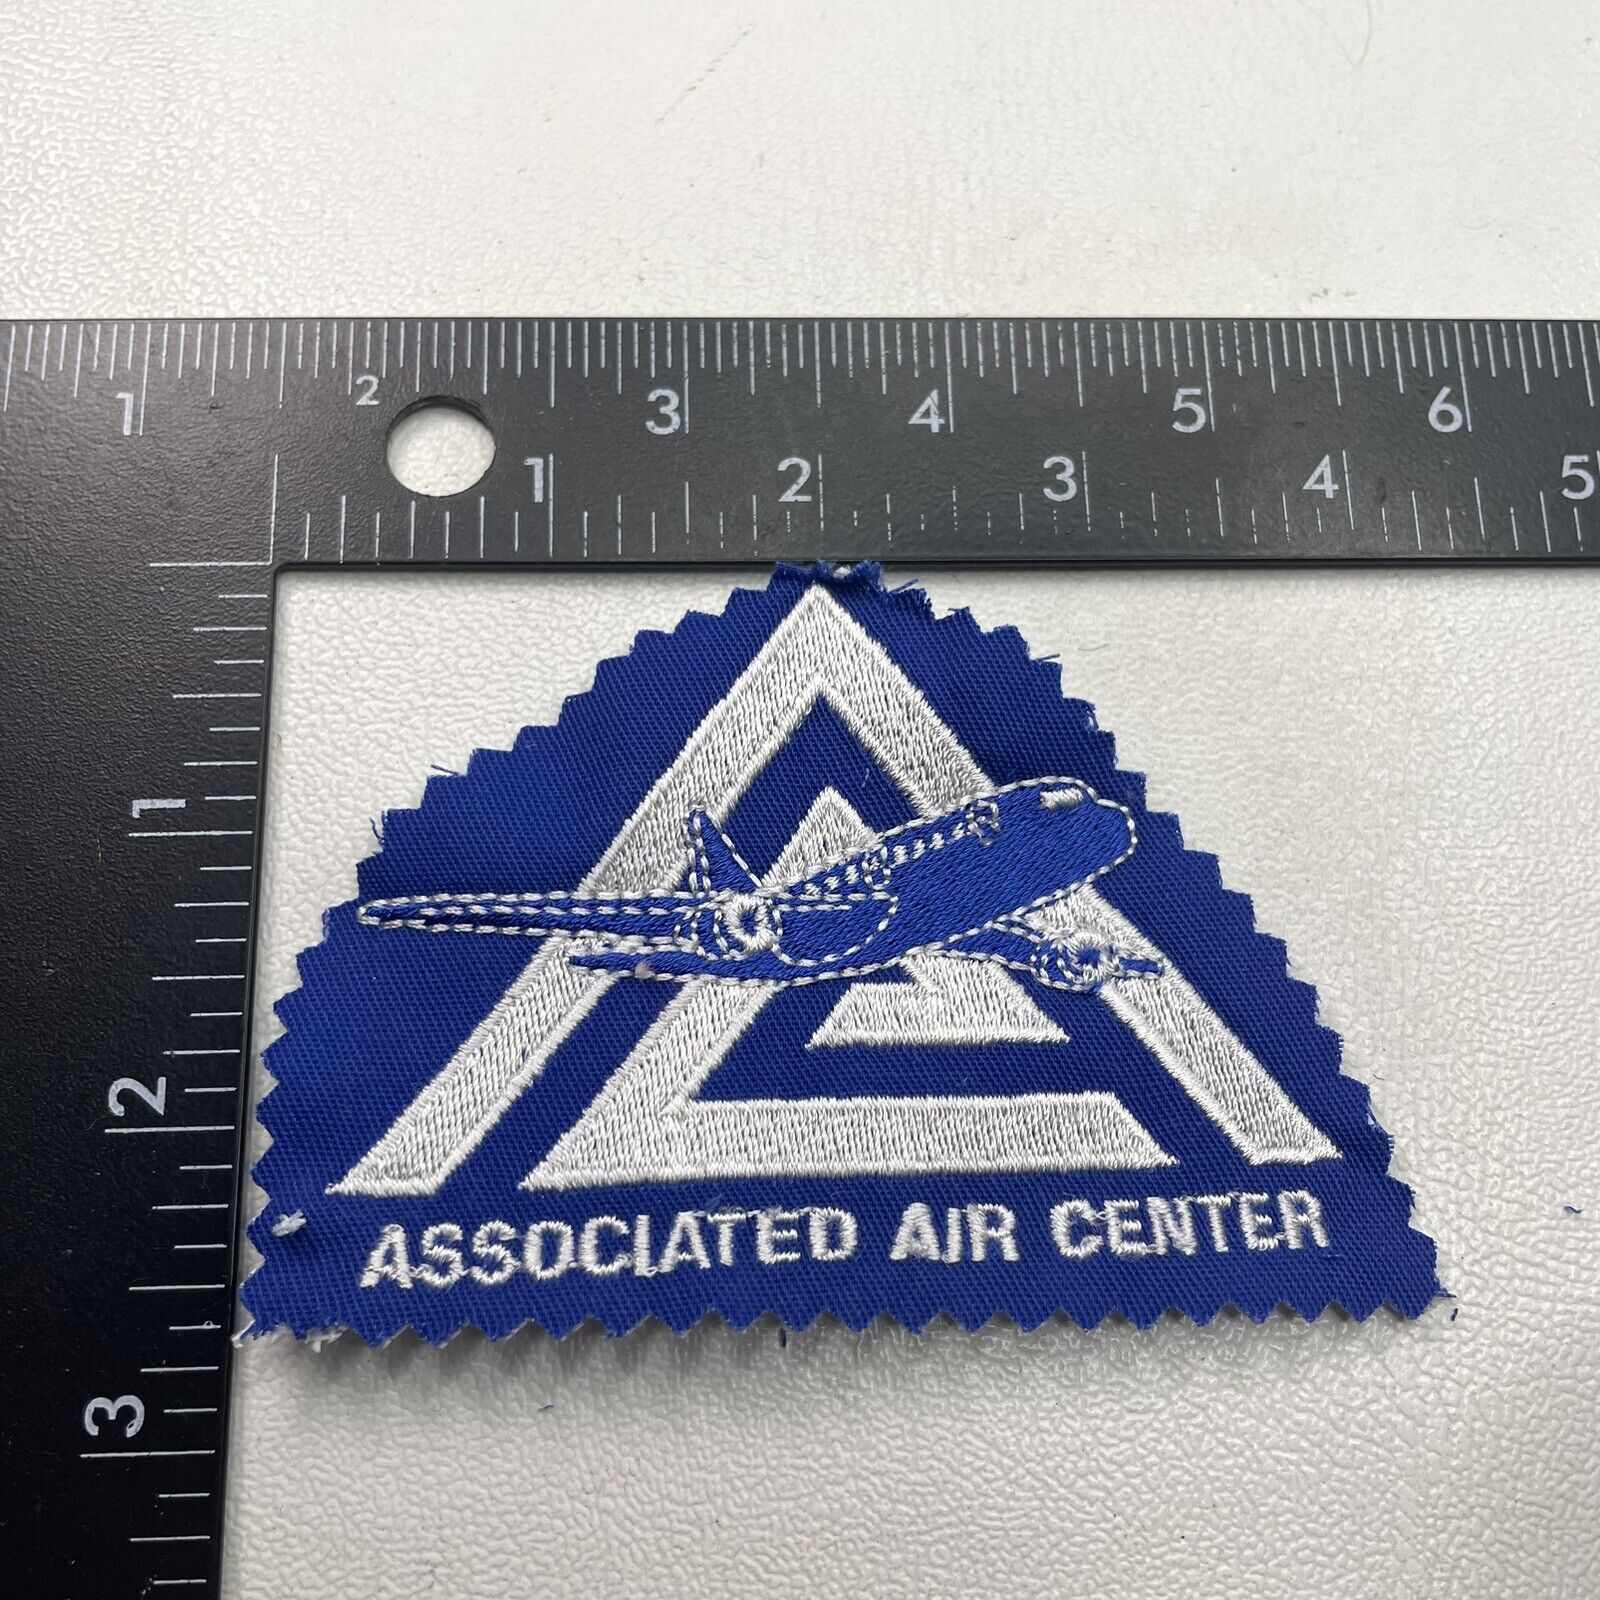 Zig-Zag-Cut-From-Hat Patch-ish Piece ASSOCIATED AIR CENTER (Blue Airplane) 32R6